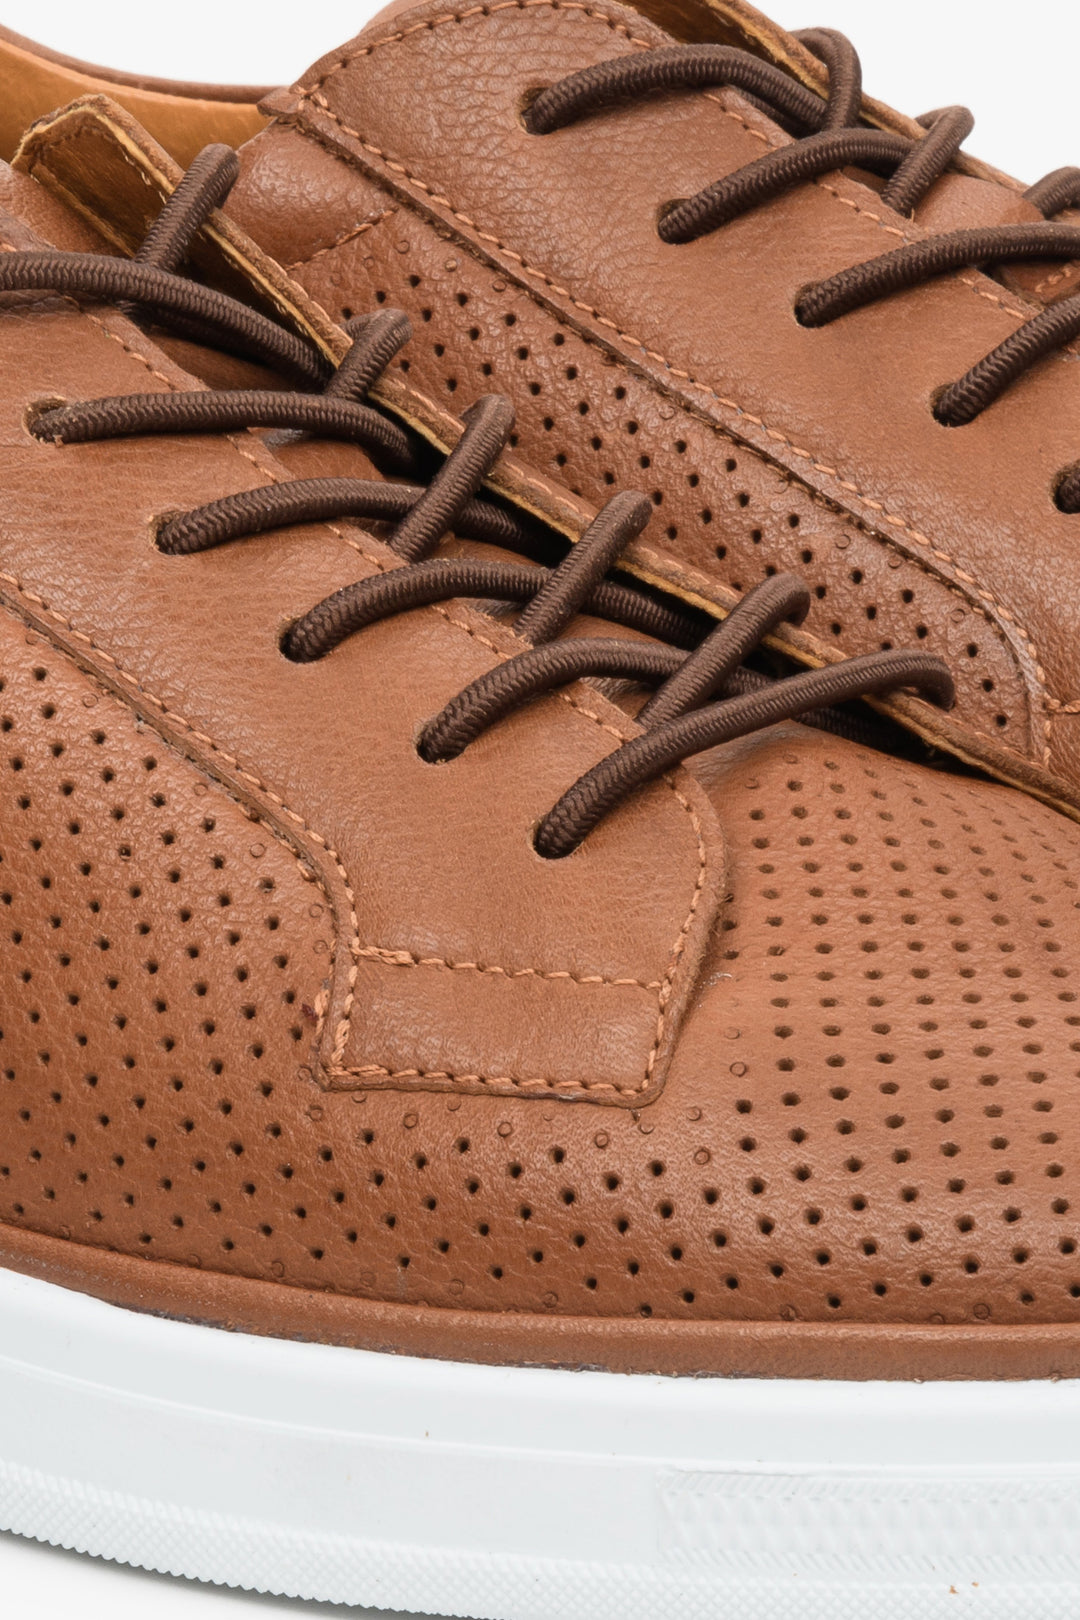 Estro men's sneakers in brown with perforations and lacing for summer - close-up on details.